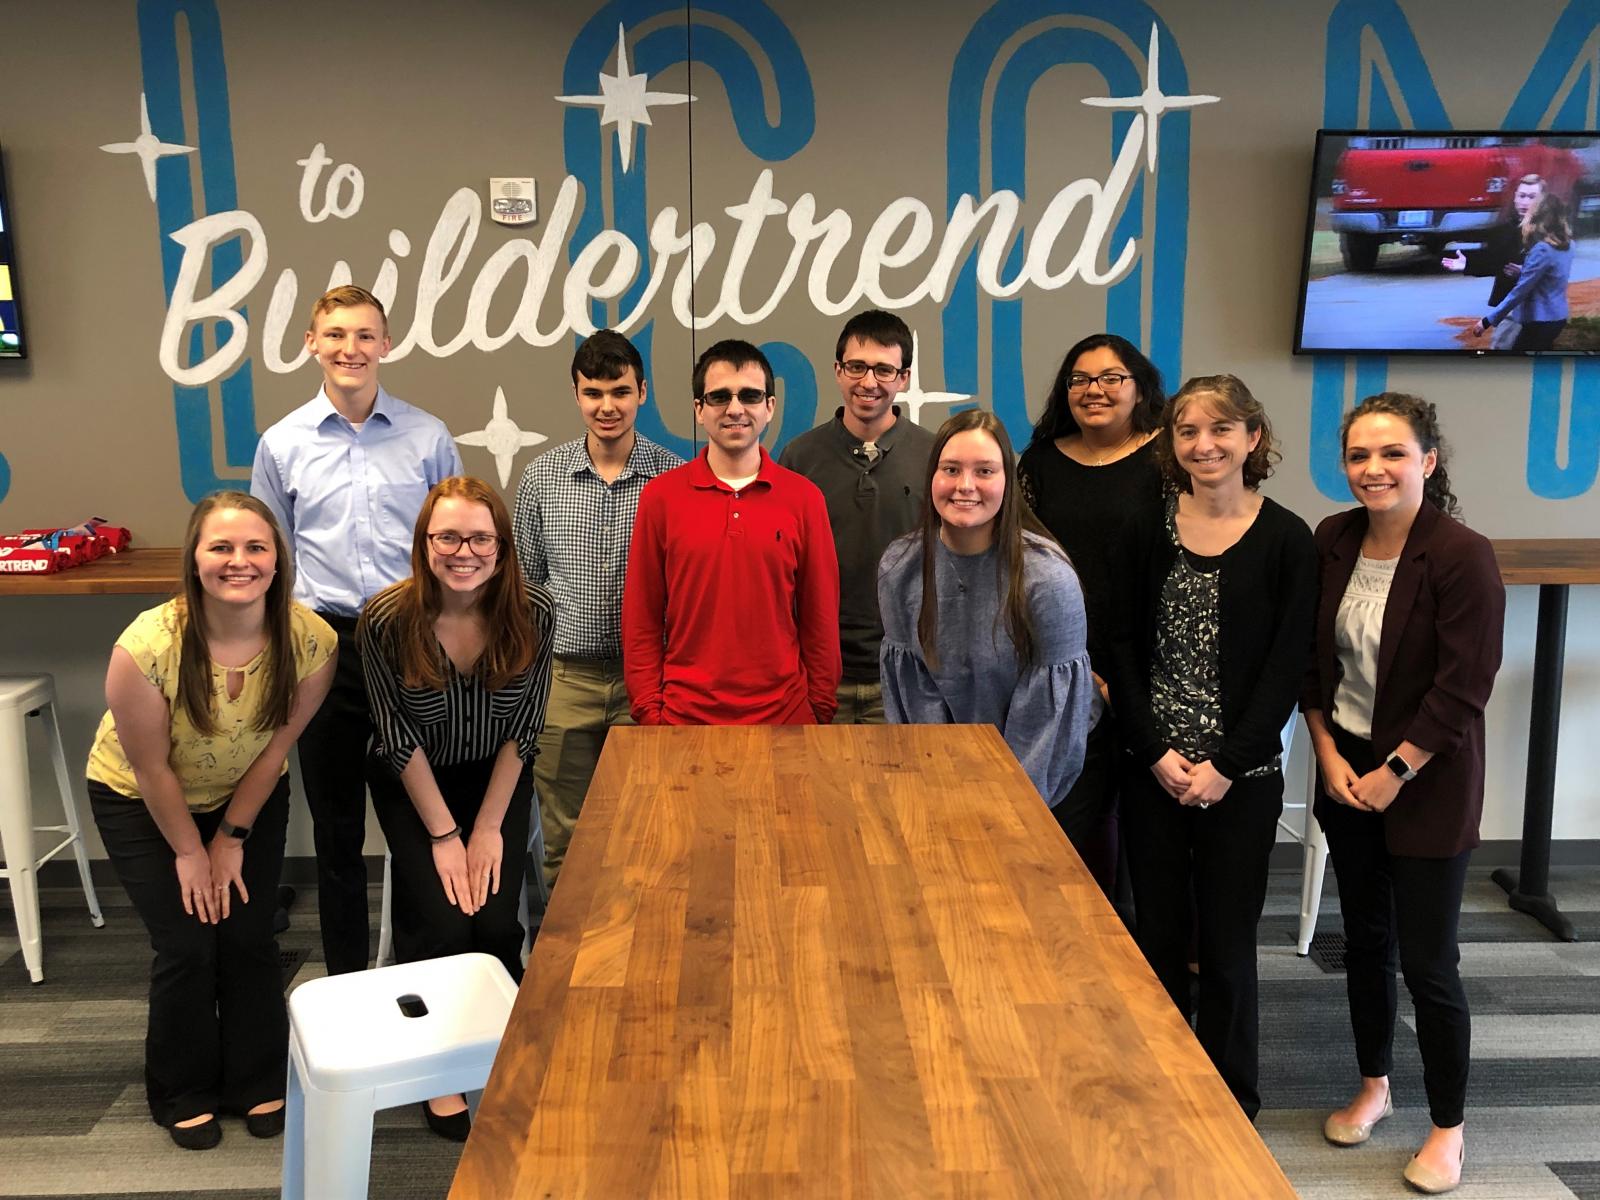 Business students visit the Buildertrend company in Omaha